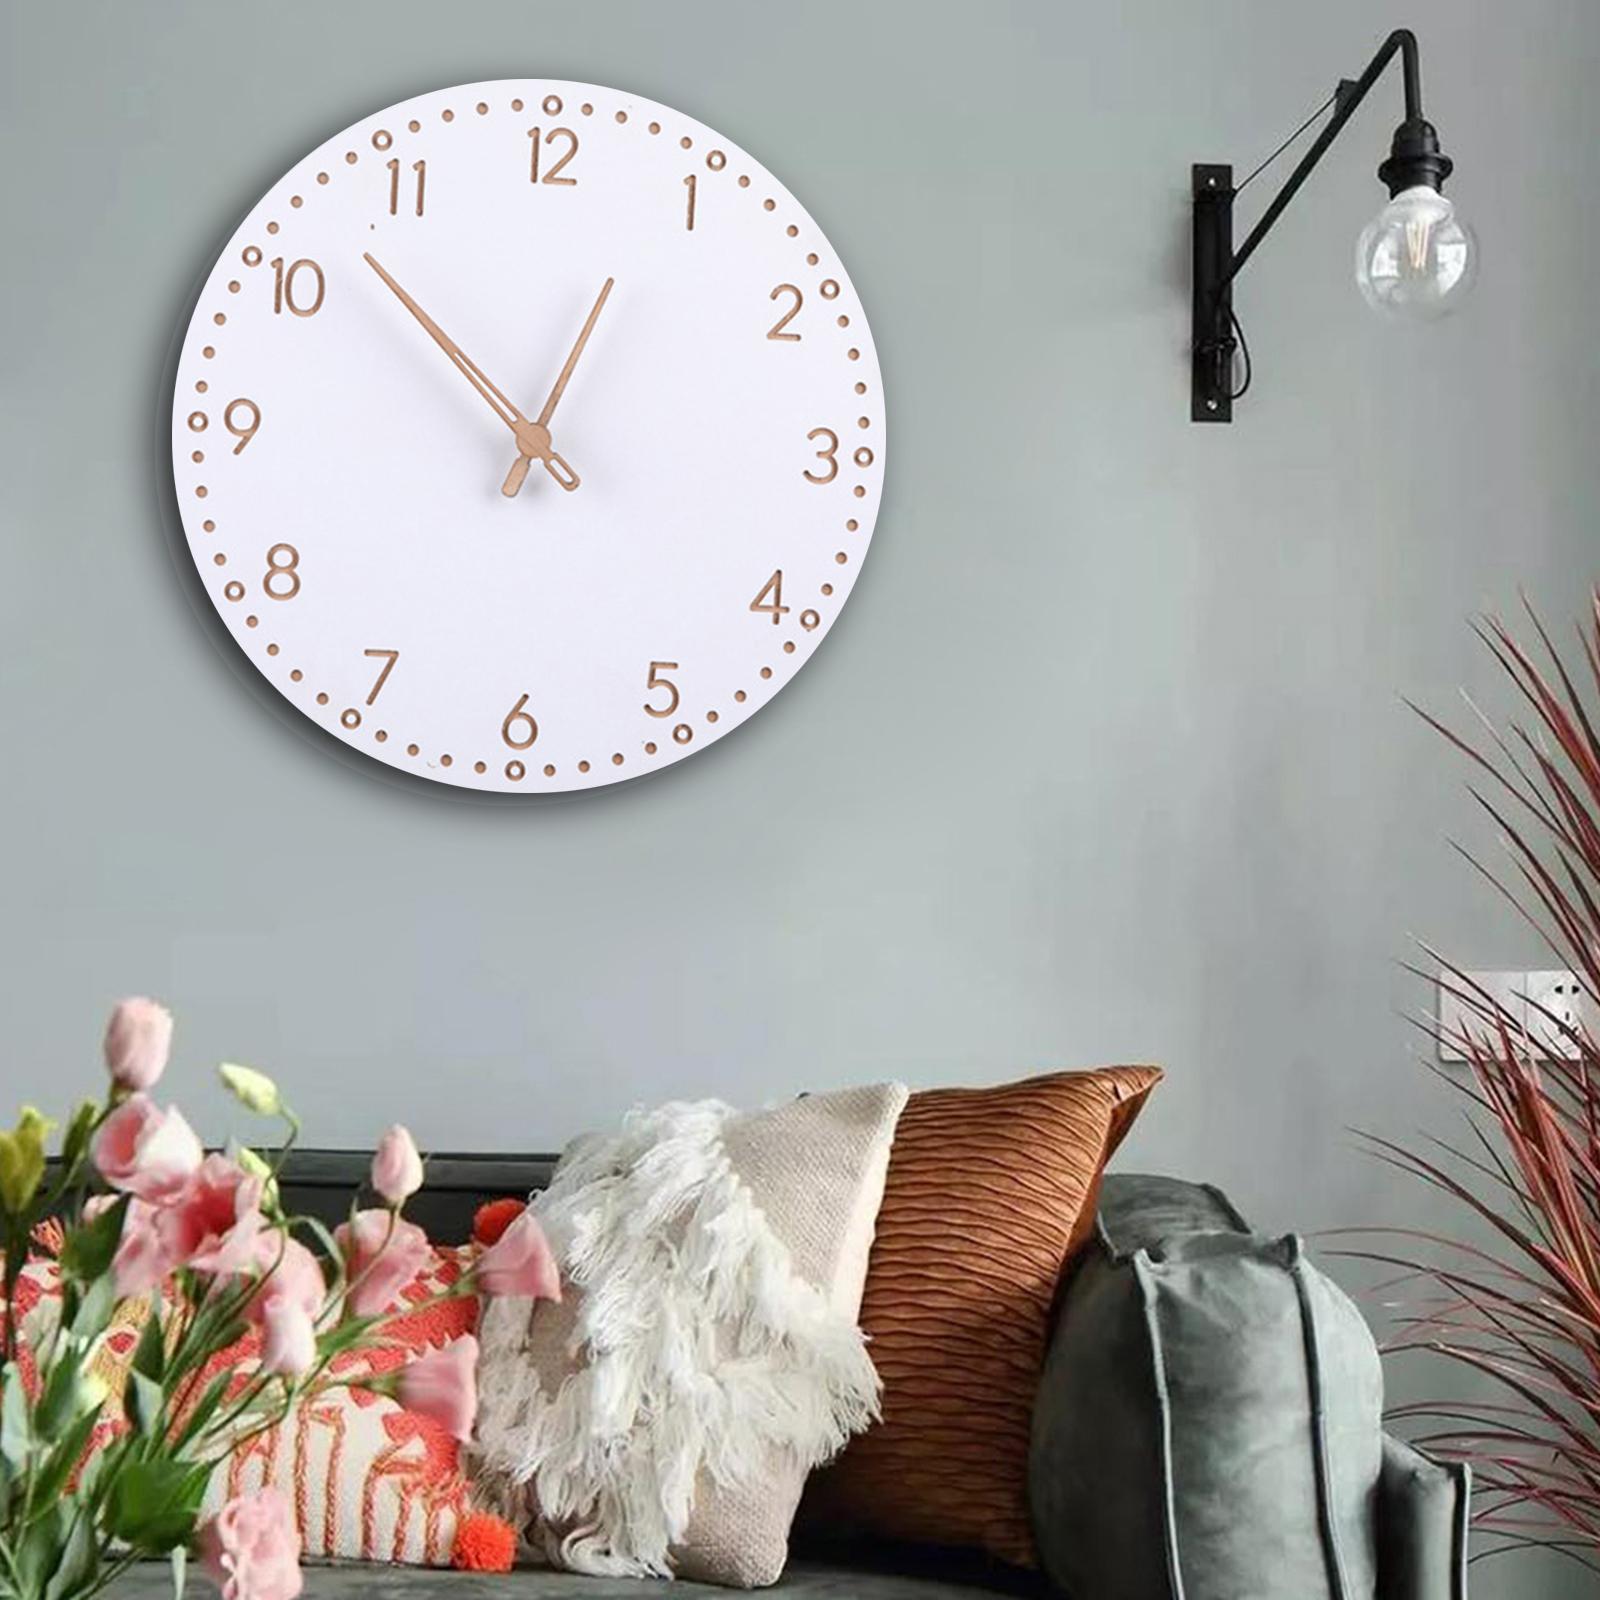 12 Inch Wall Clock, Round Nordic Wall Clock, Non Ticking, Battery Operated, Home Decor for Living Room Bedroom Office